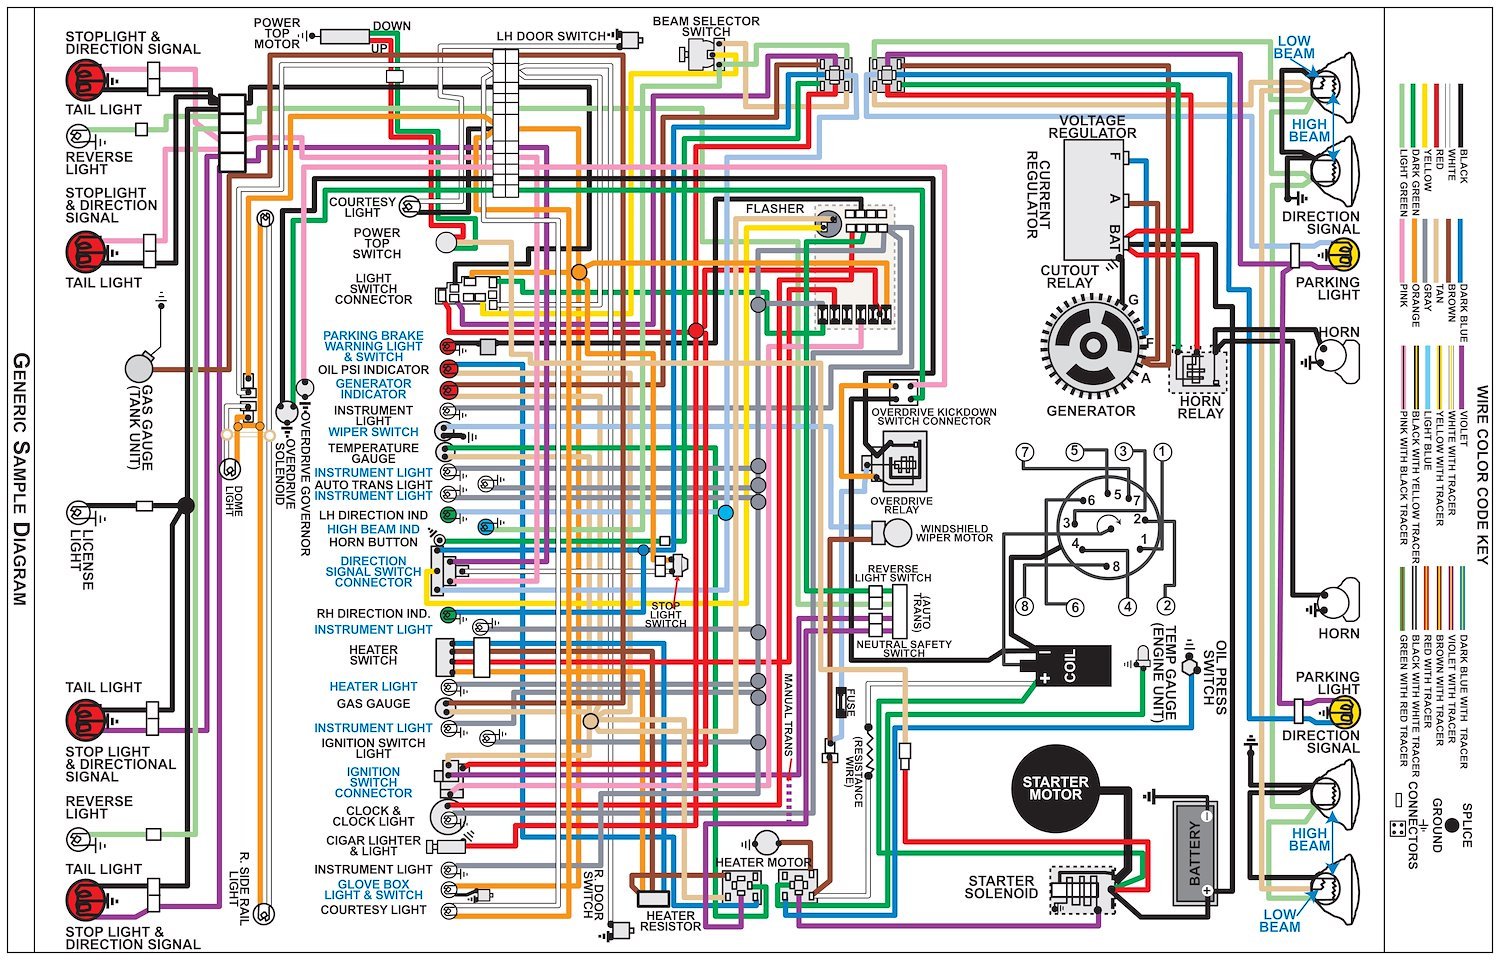 Jegs 19215 Wiring Diagram 1955 Chevy